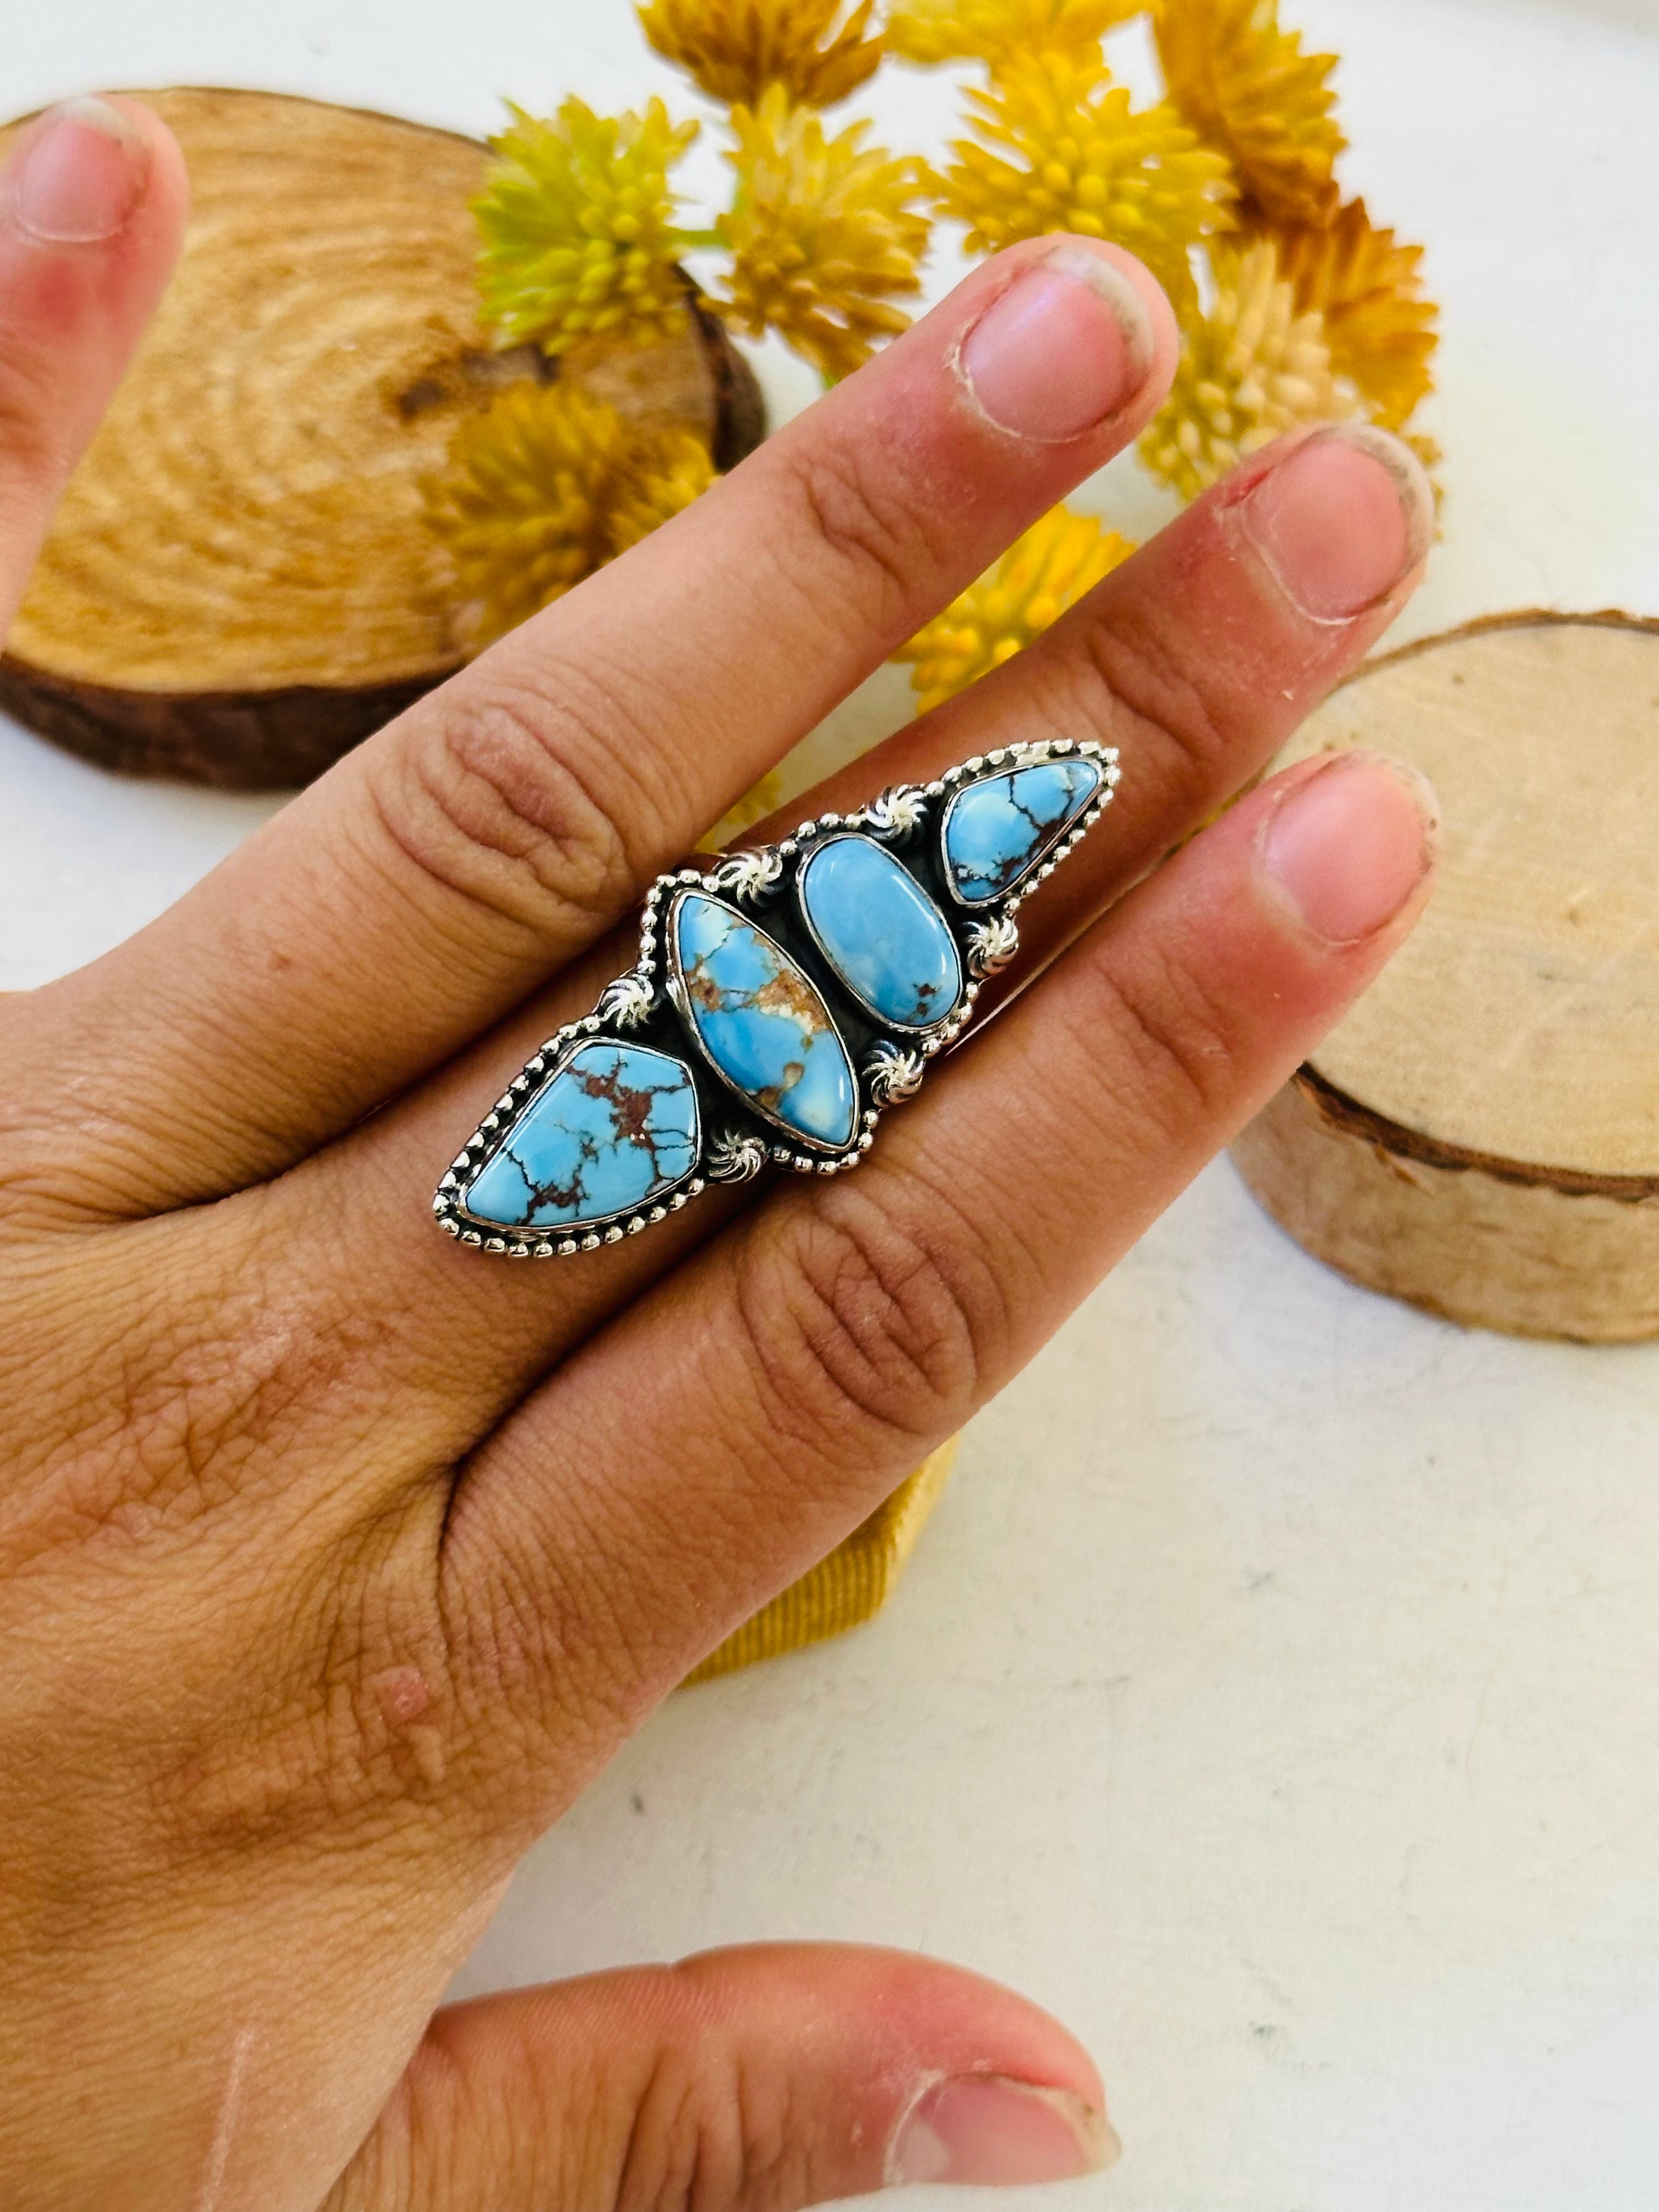 Southwest Handmade Golden Hills Turquoise & Sterling Silver Ring Size 8